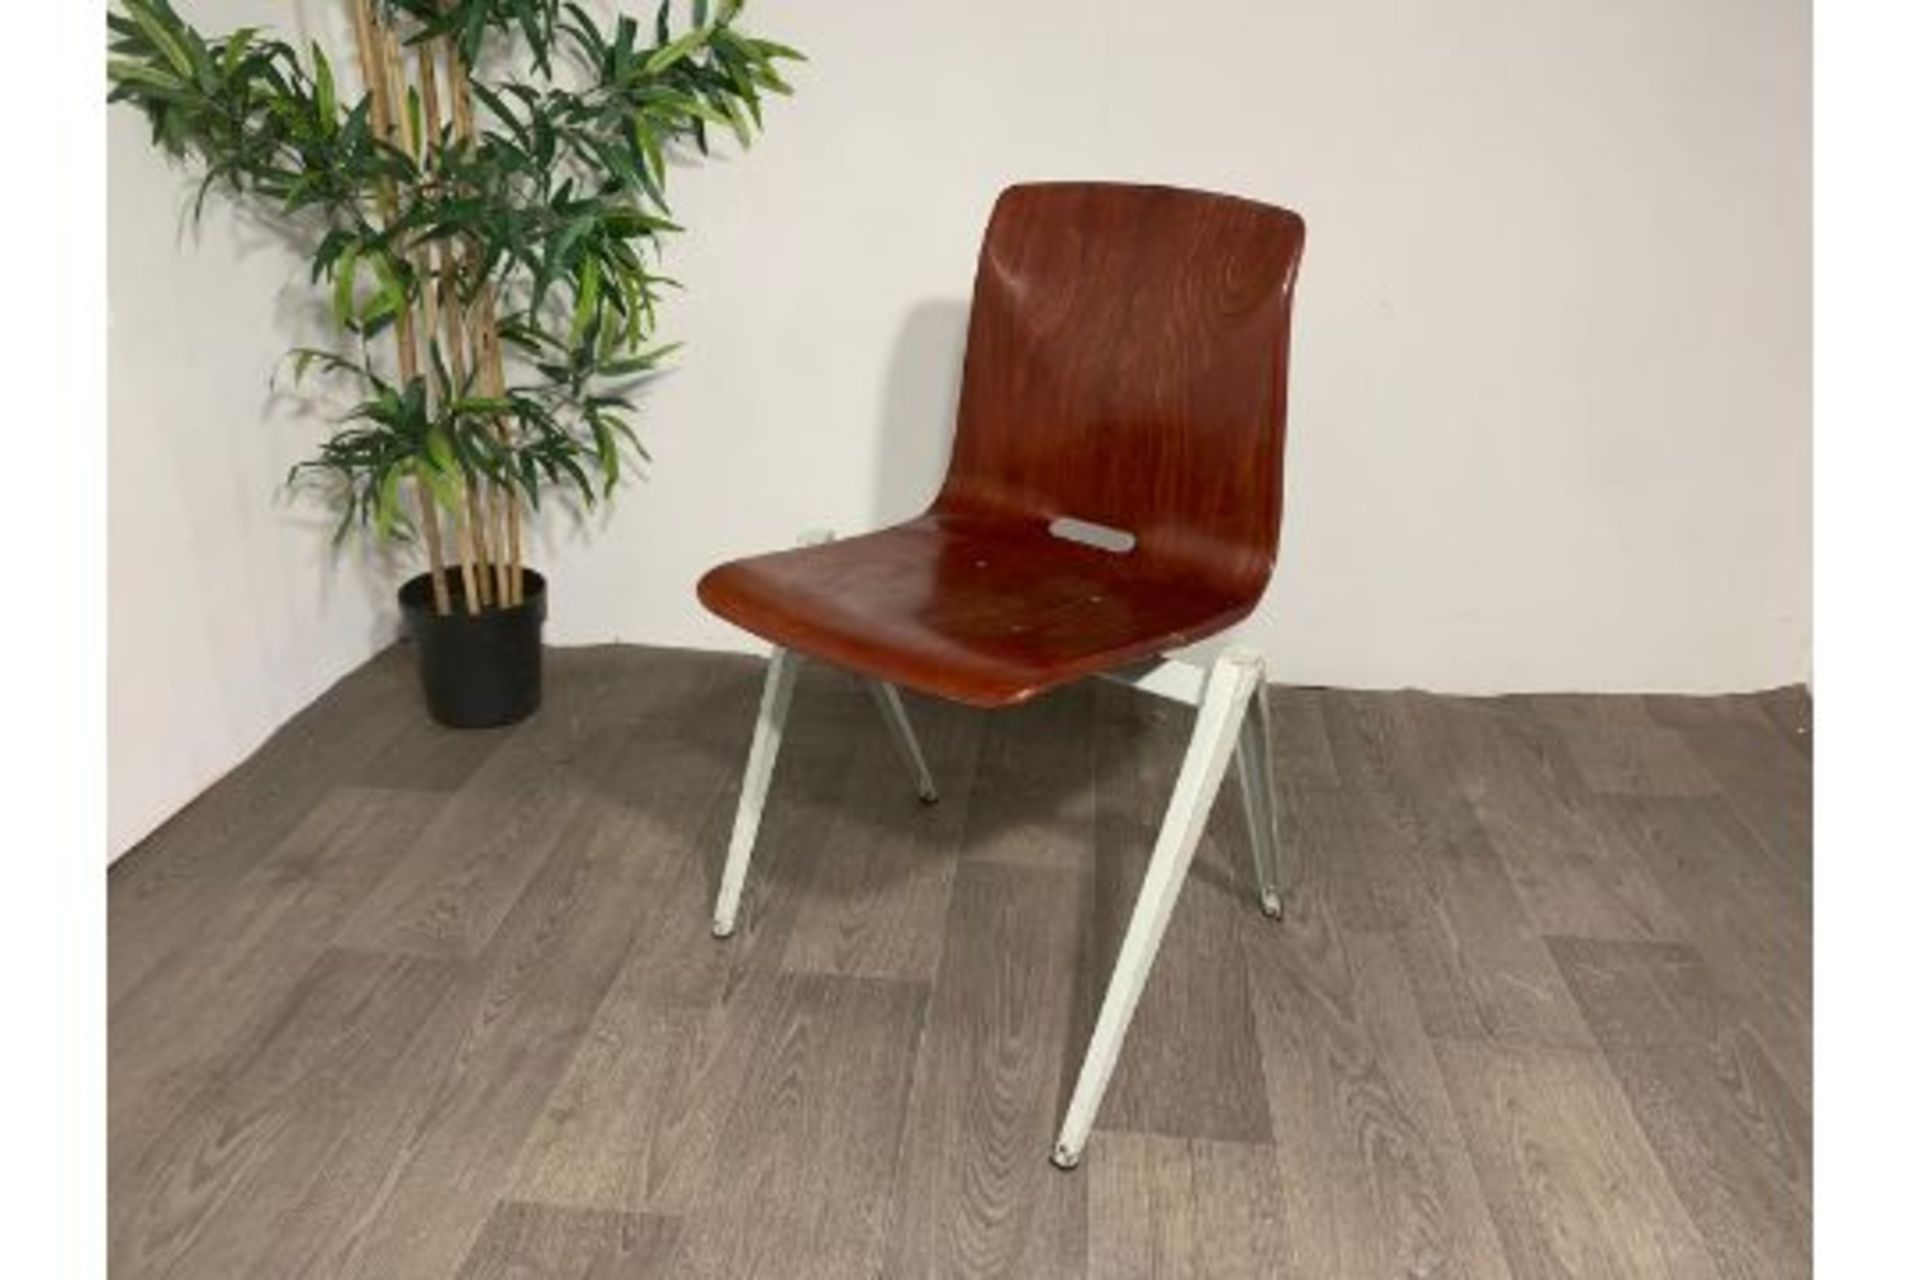 Thur Op Seat Stackable Chair in mahogany resin x2 - Image 3 of 6